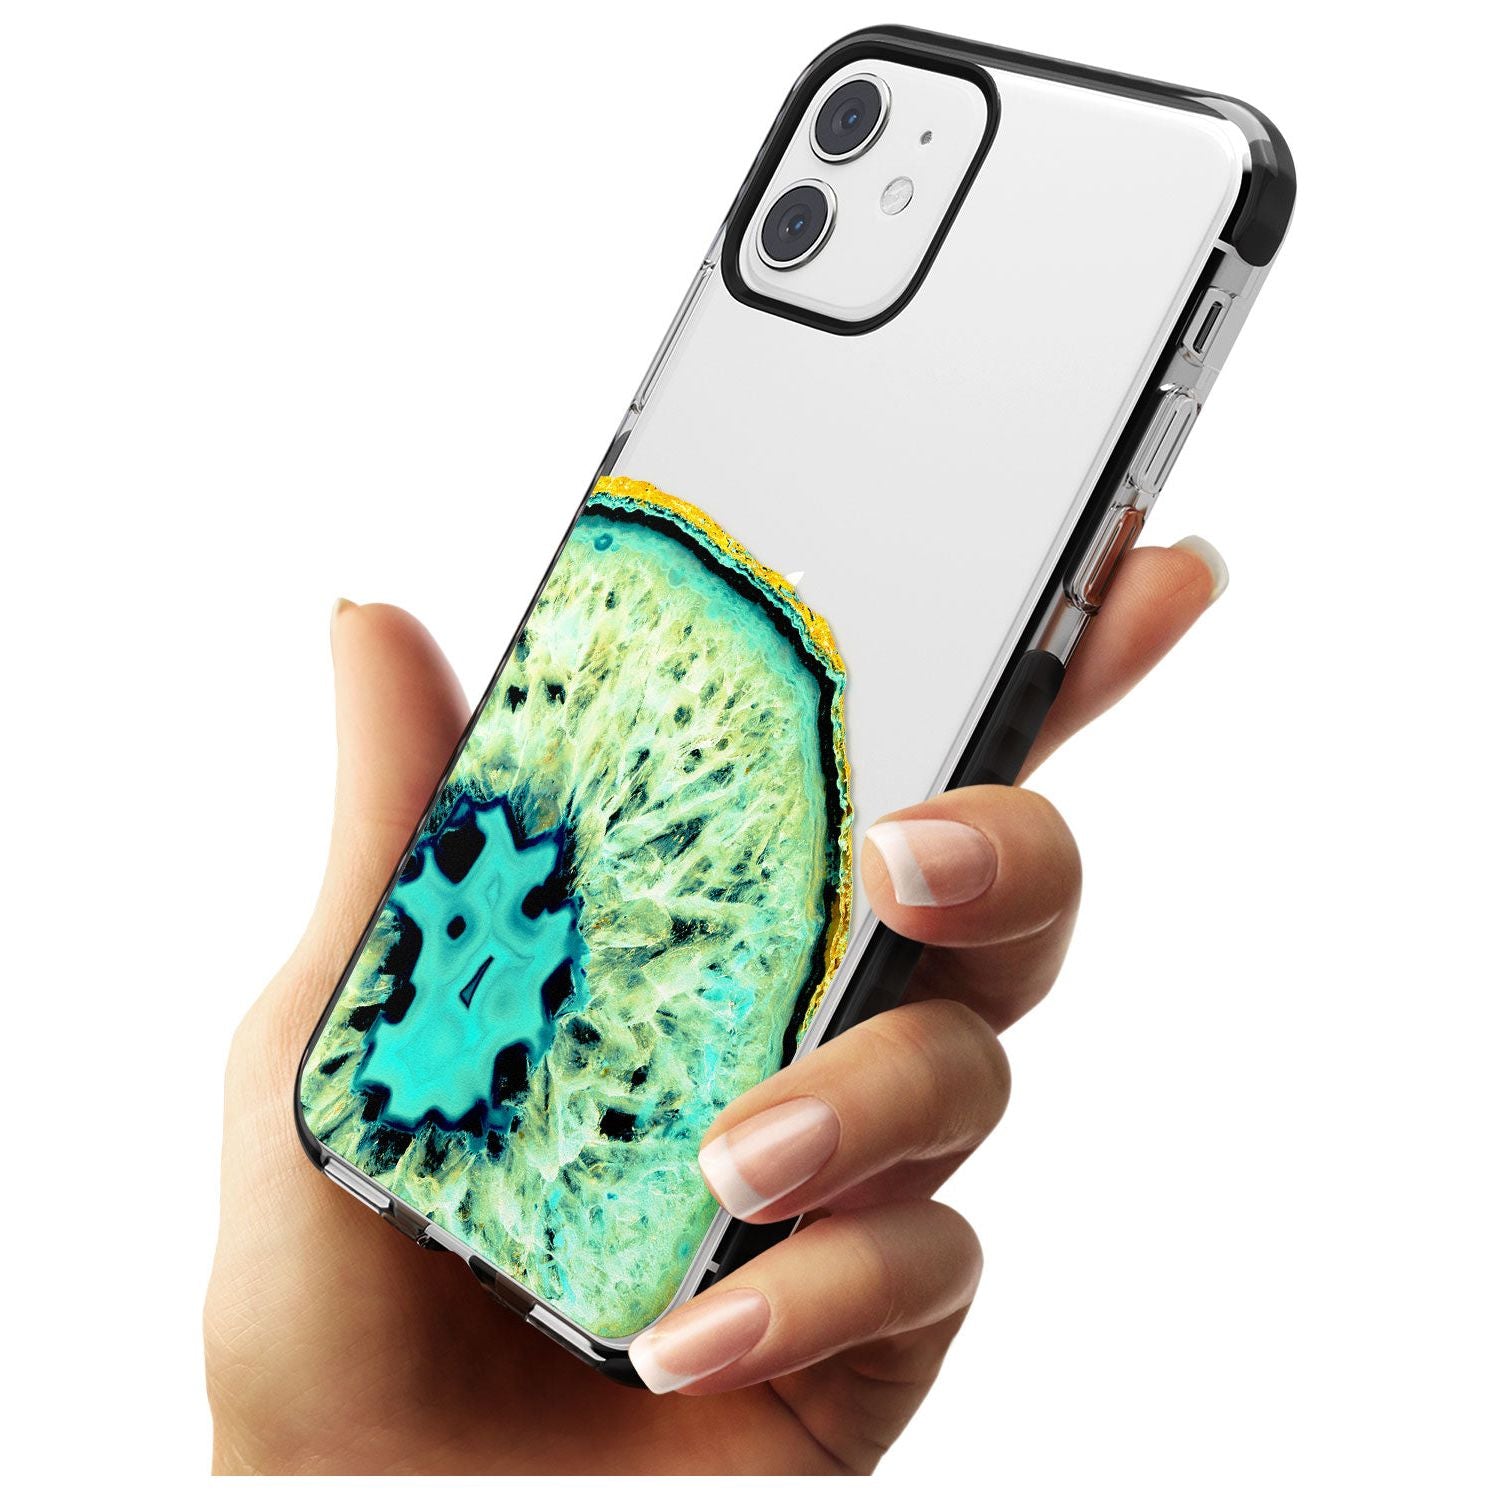 Turquoise & Green Gemstone Crystal Clear Design Black Impact Phone Case for iPhone 11